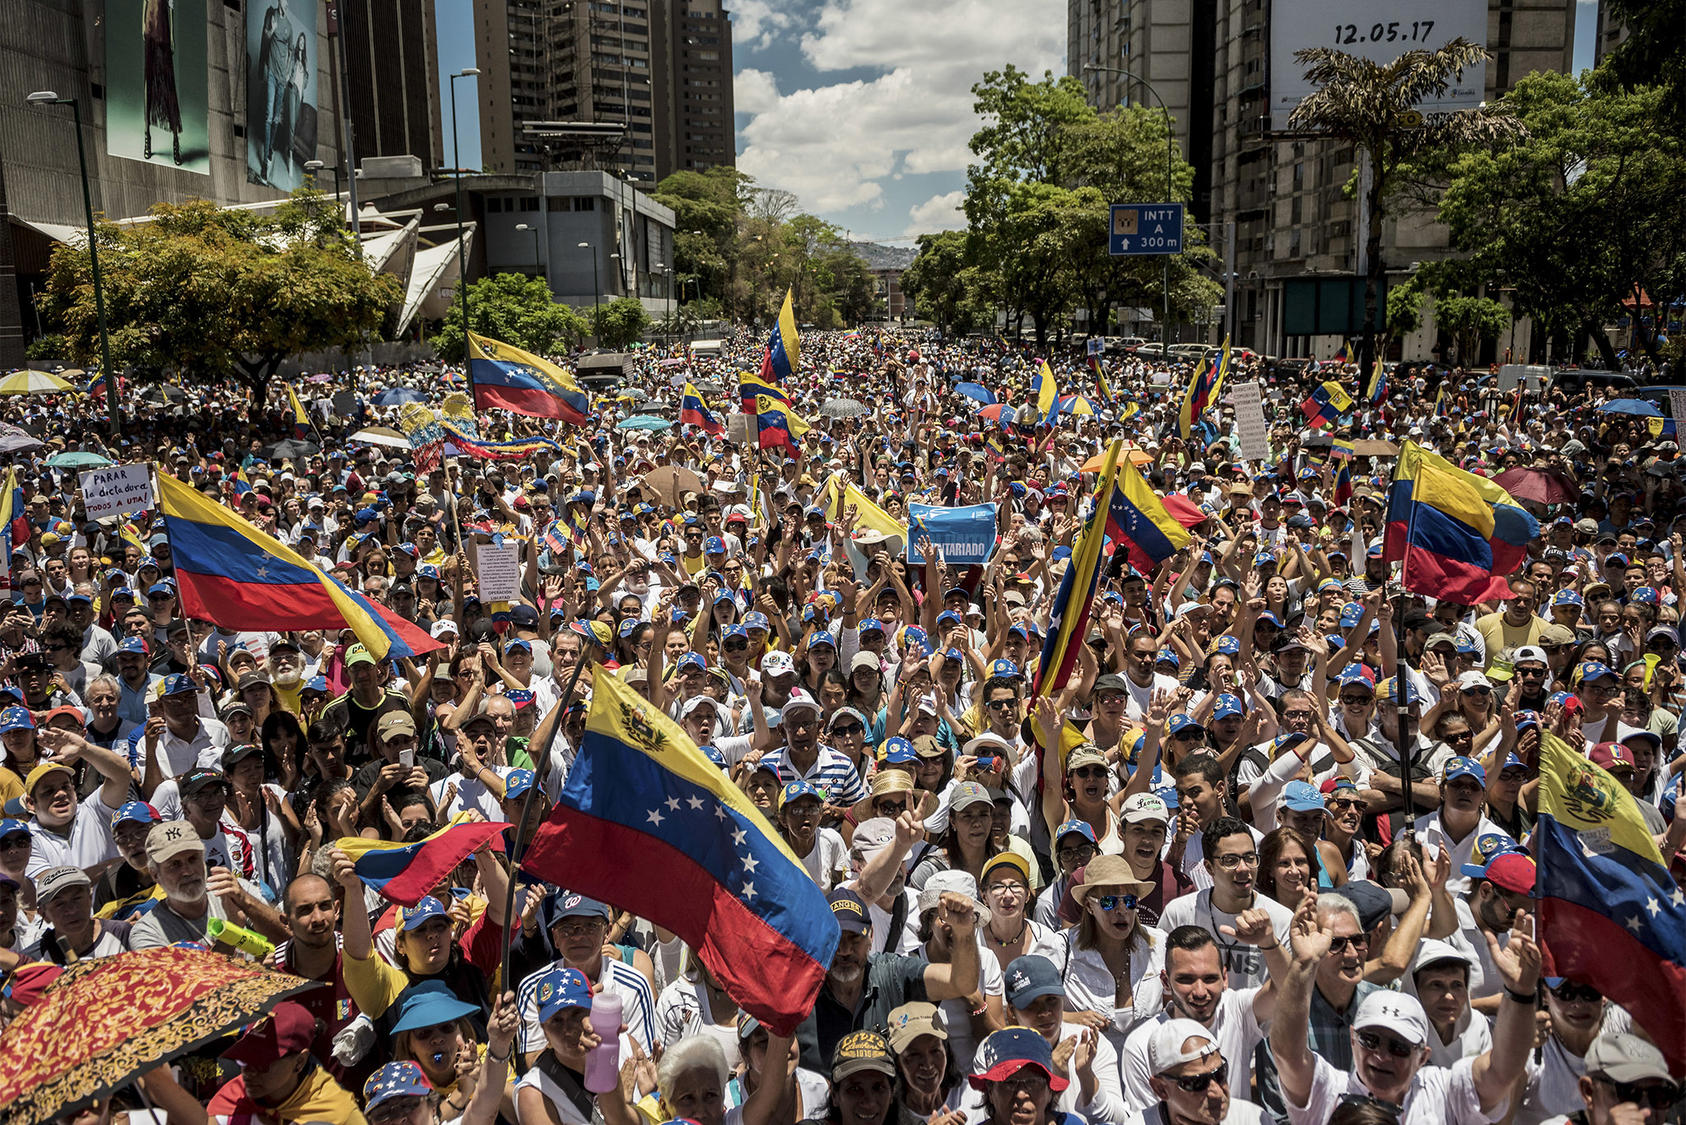 Opposition supporters wave Venezuelan flags as they march across eastern Caracas to show their discontent with the Maduro government. April 6, 2019. (Meridith Kohut/The New York Times)